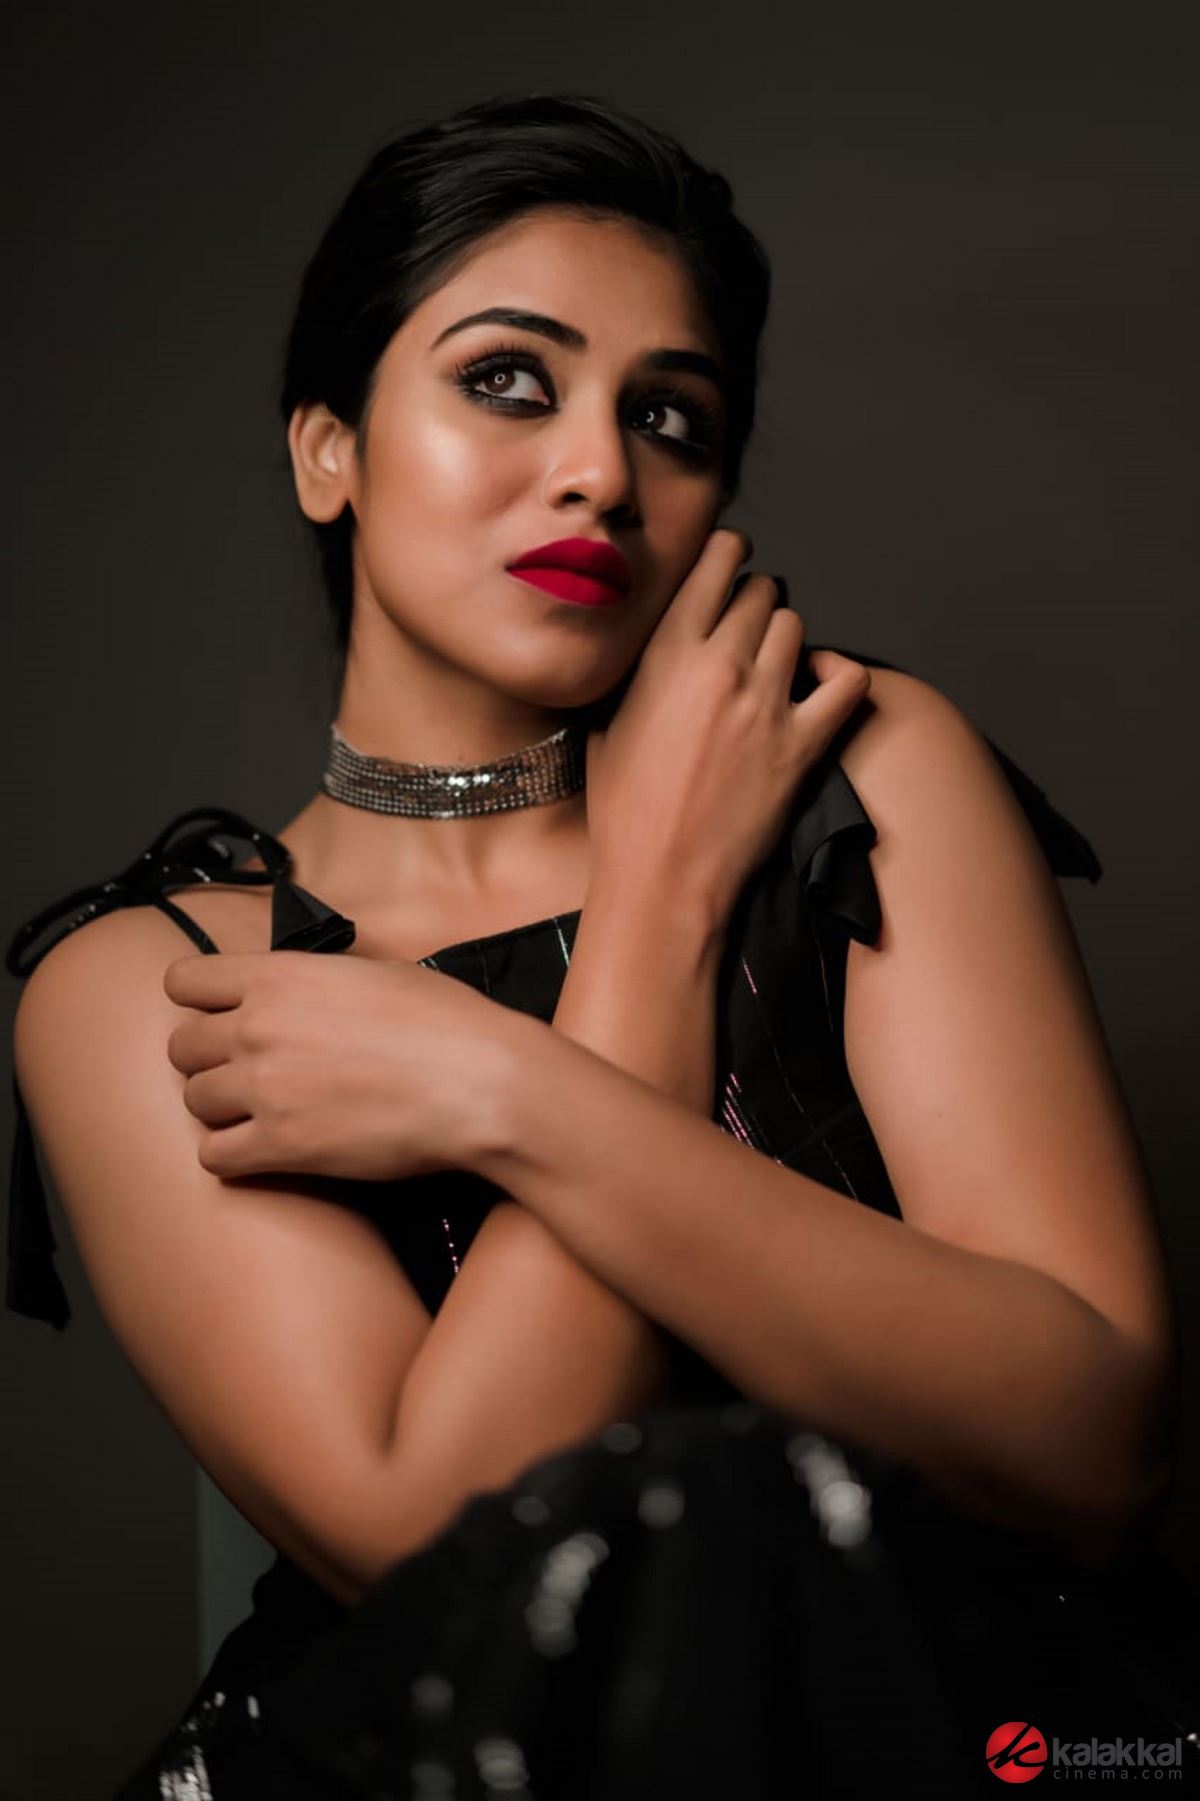 Beauty In Black Indhuja